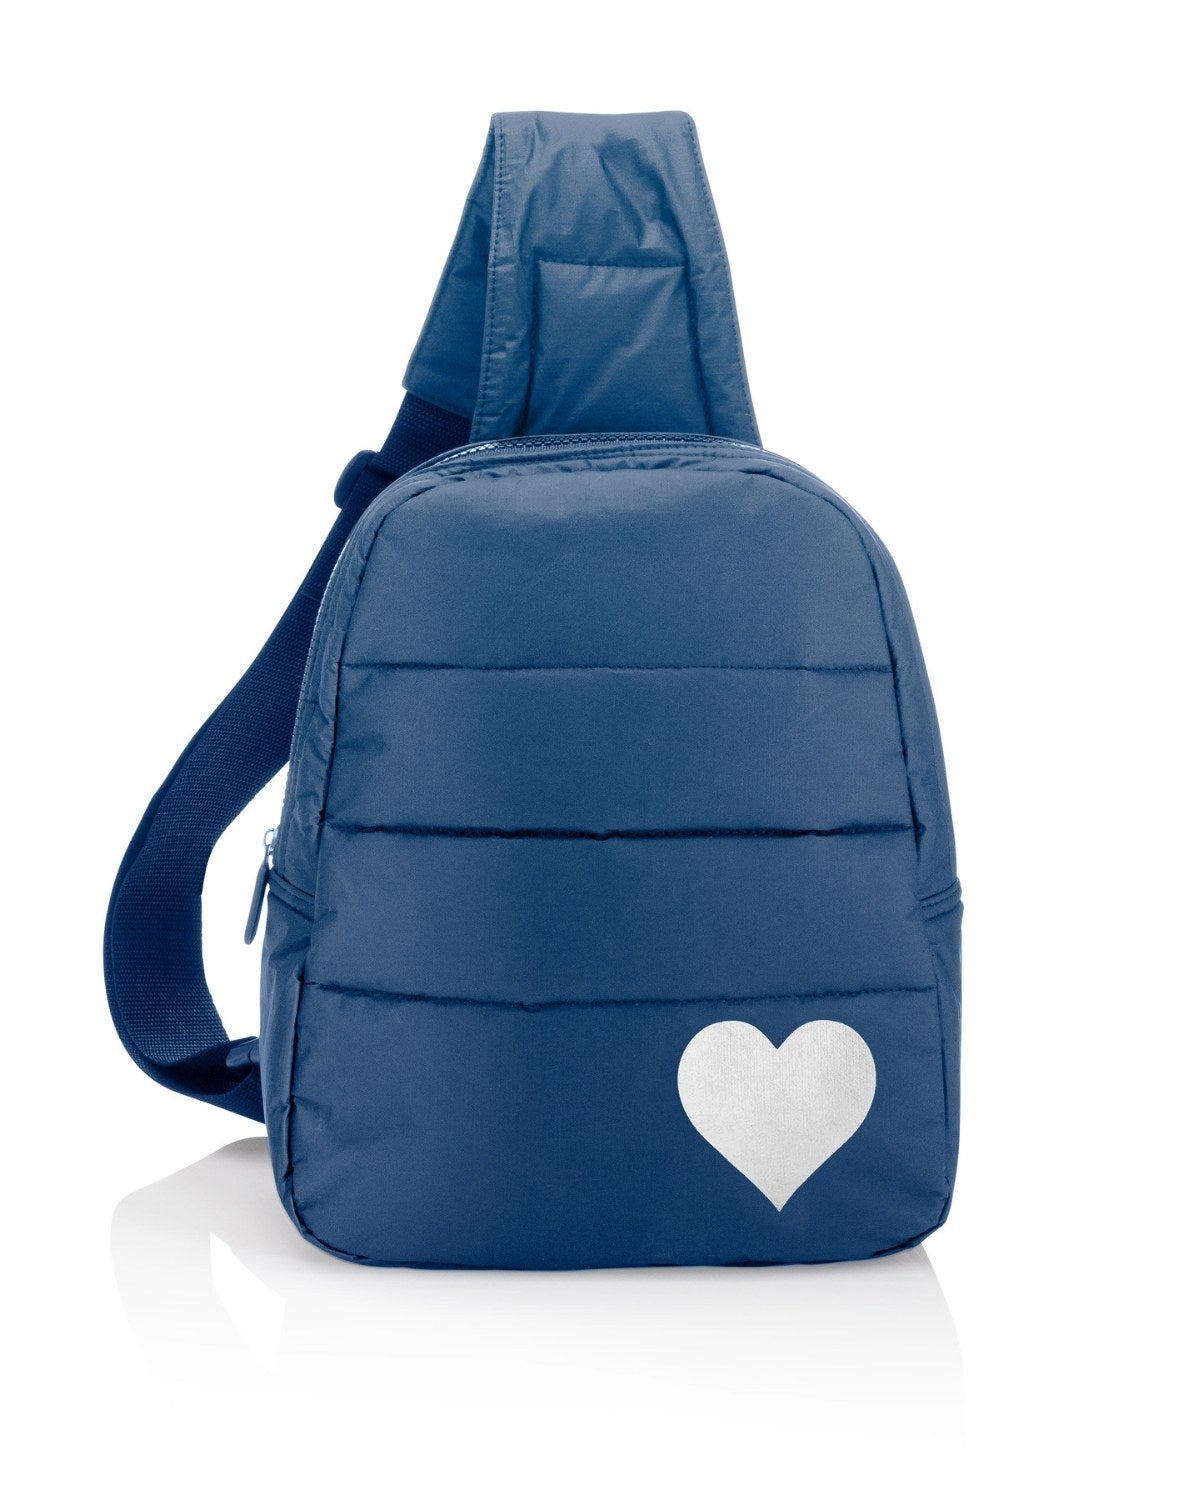 Puffer Crossbody Backpack in Shimmer Navy with Silver Heart